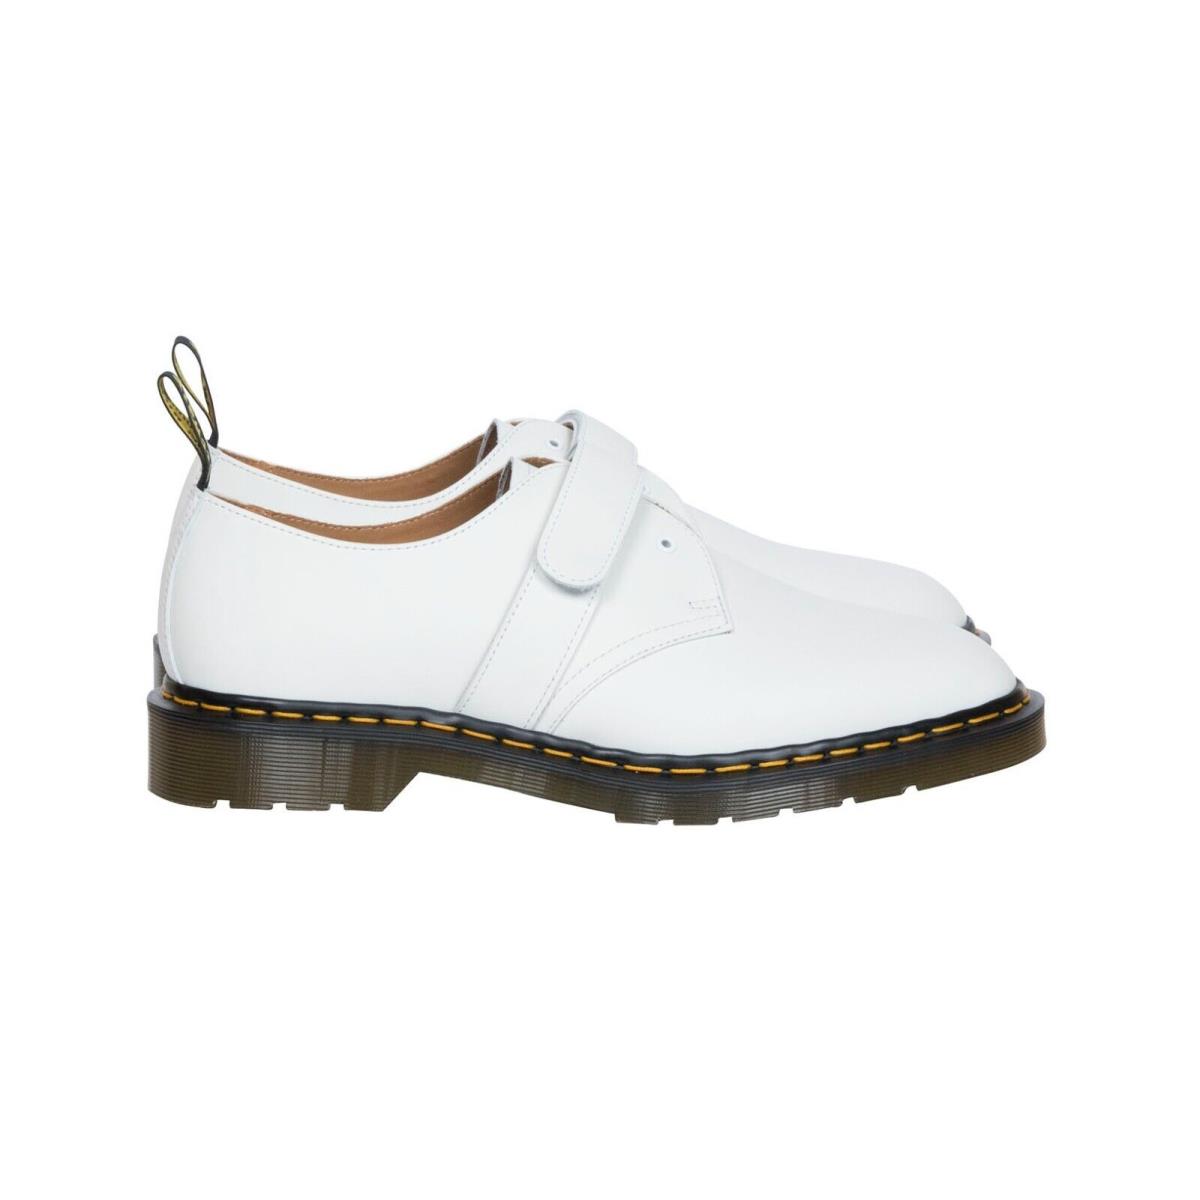 Dr. Martens For Engineered Garments Oxford Shoe Airwair US 5 White